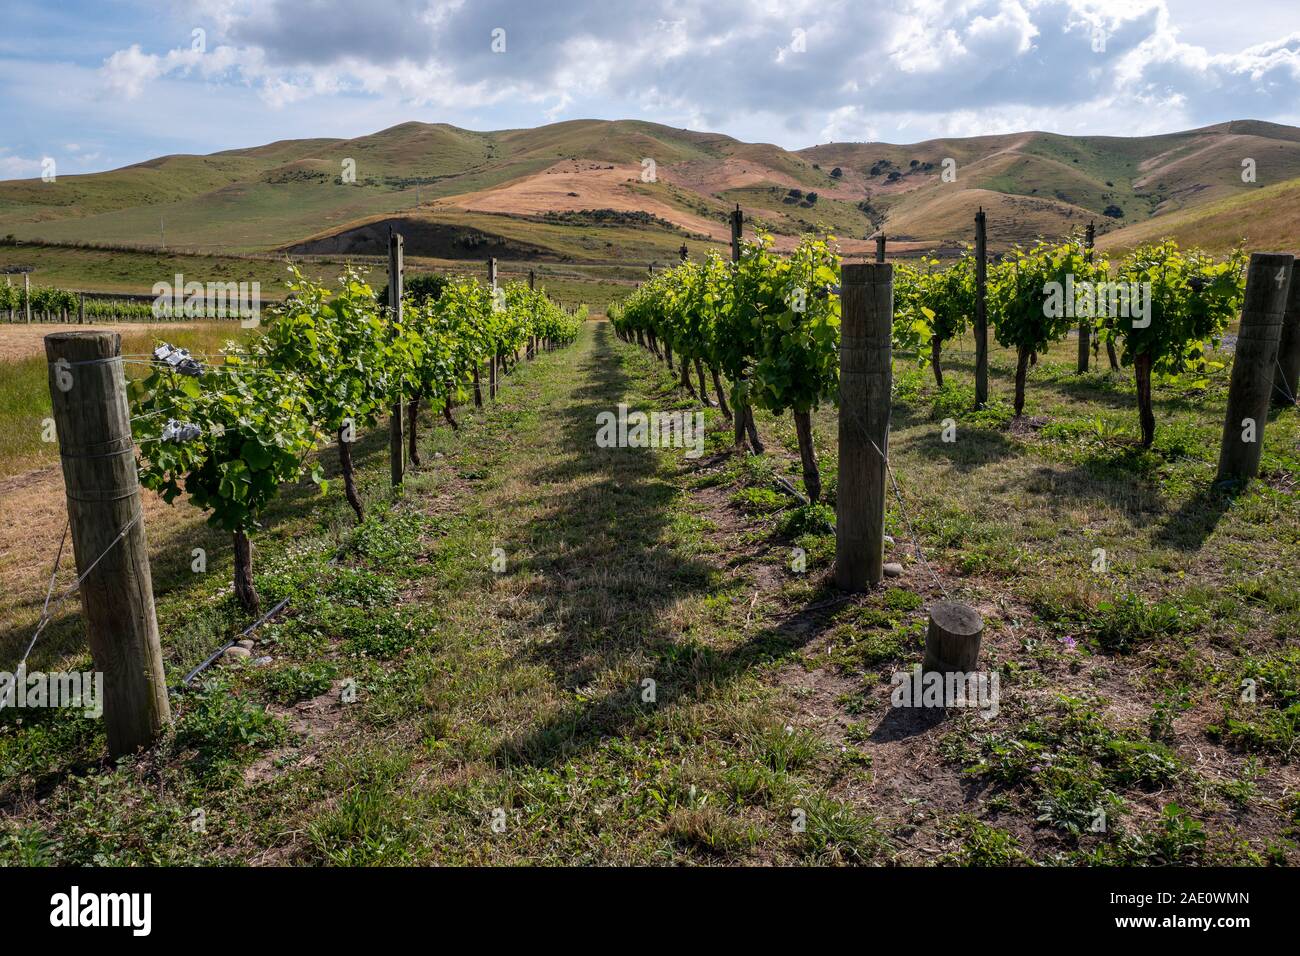 Cloudy Bay Winery in New Zealand Stock Photo - Image of plant, vineyard:  196698398